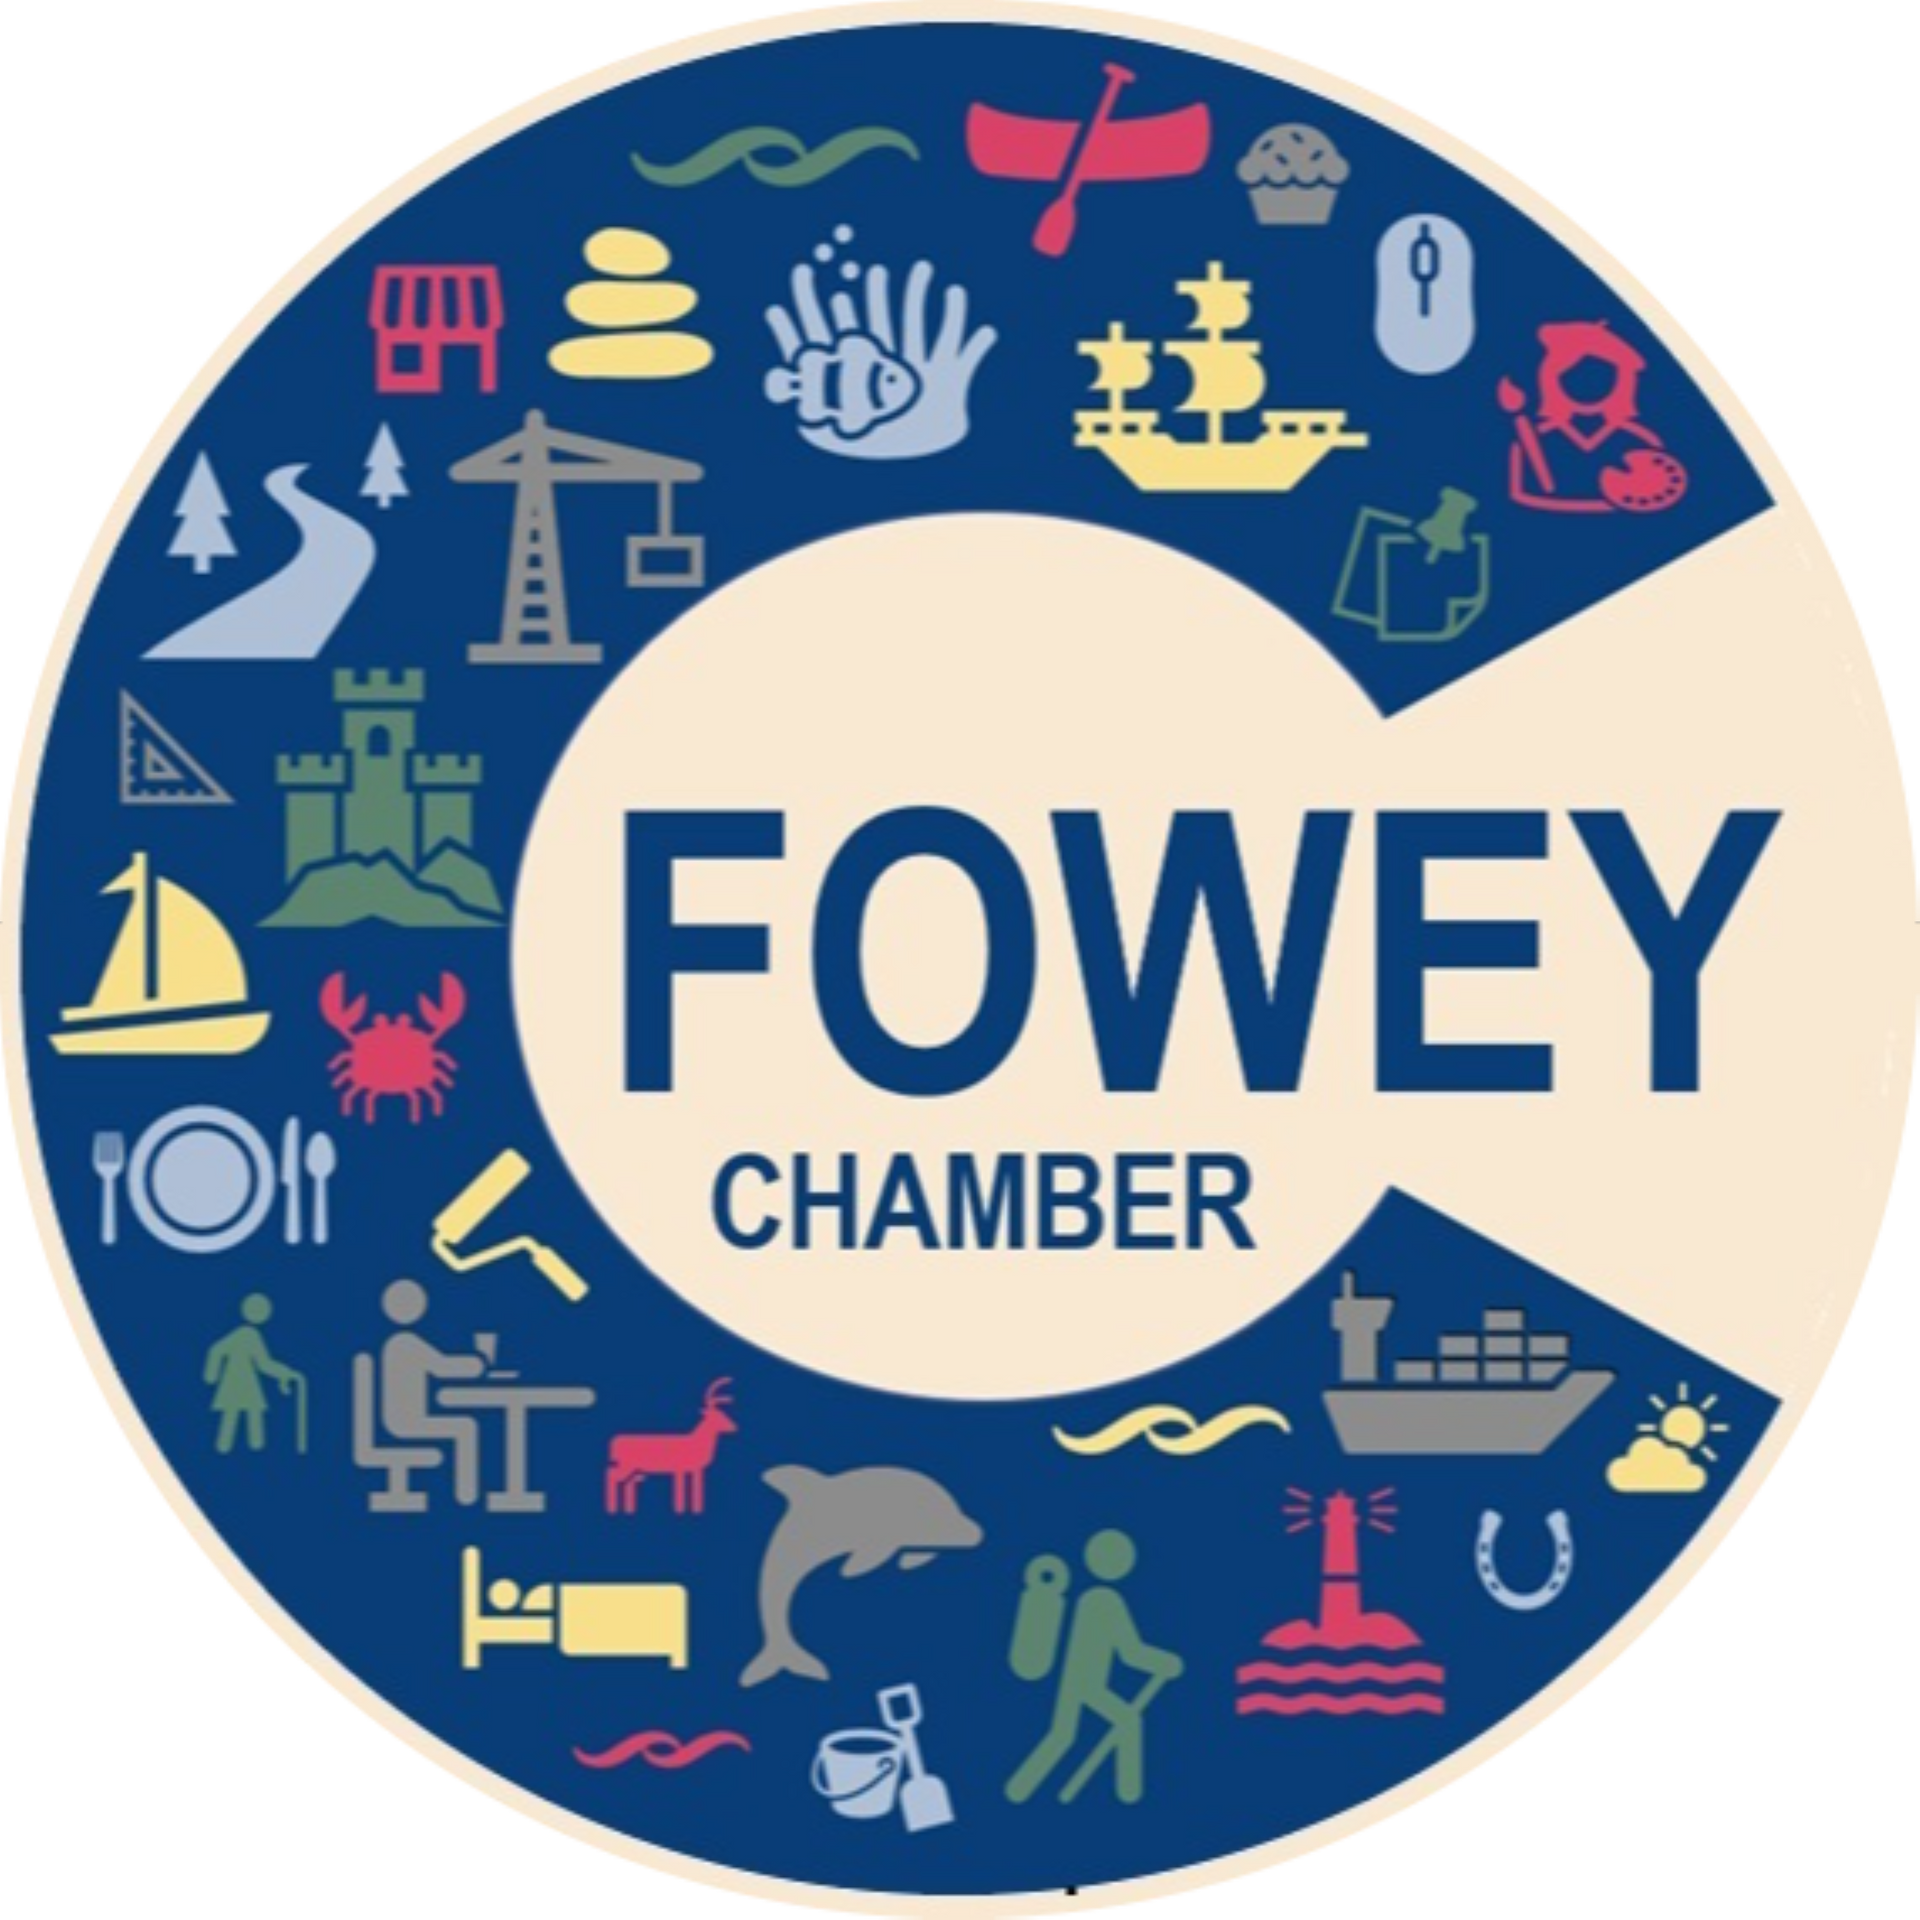 Fowey Chamber logo with colourful icons depicting the Fowey area